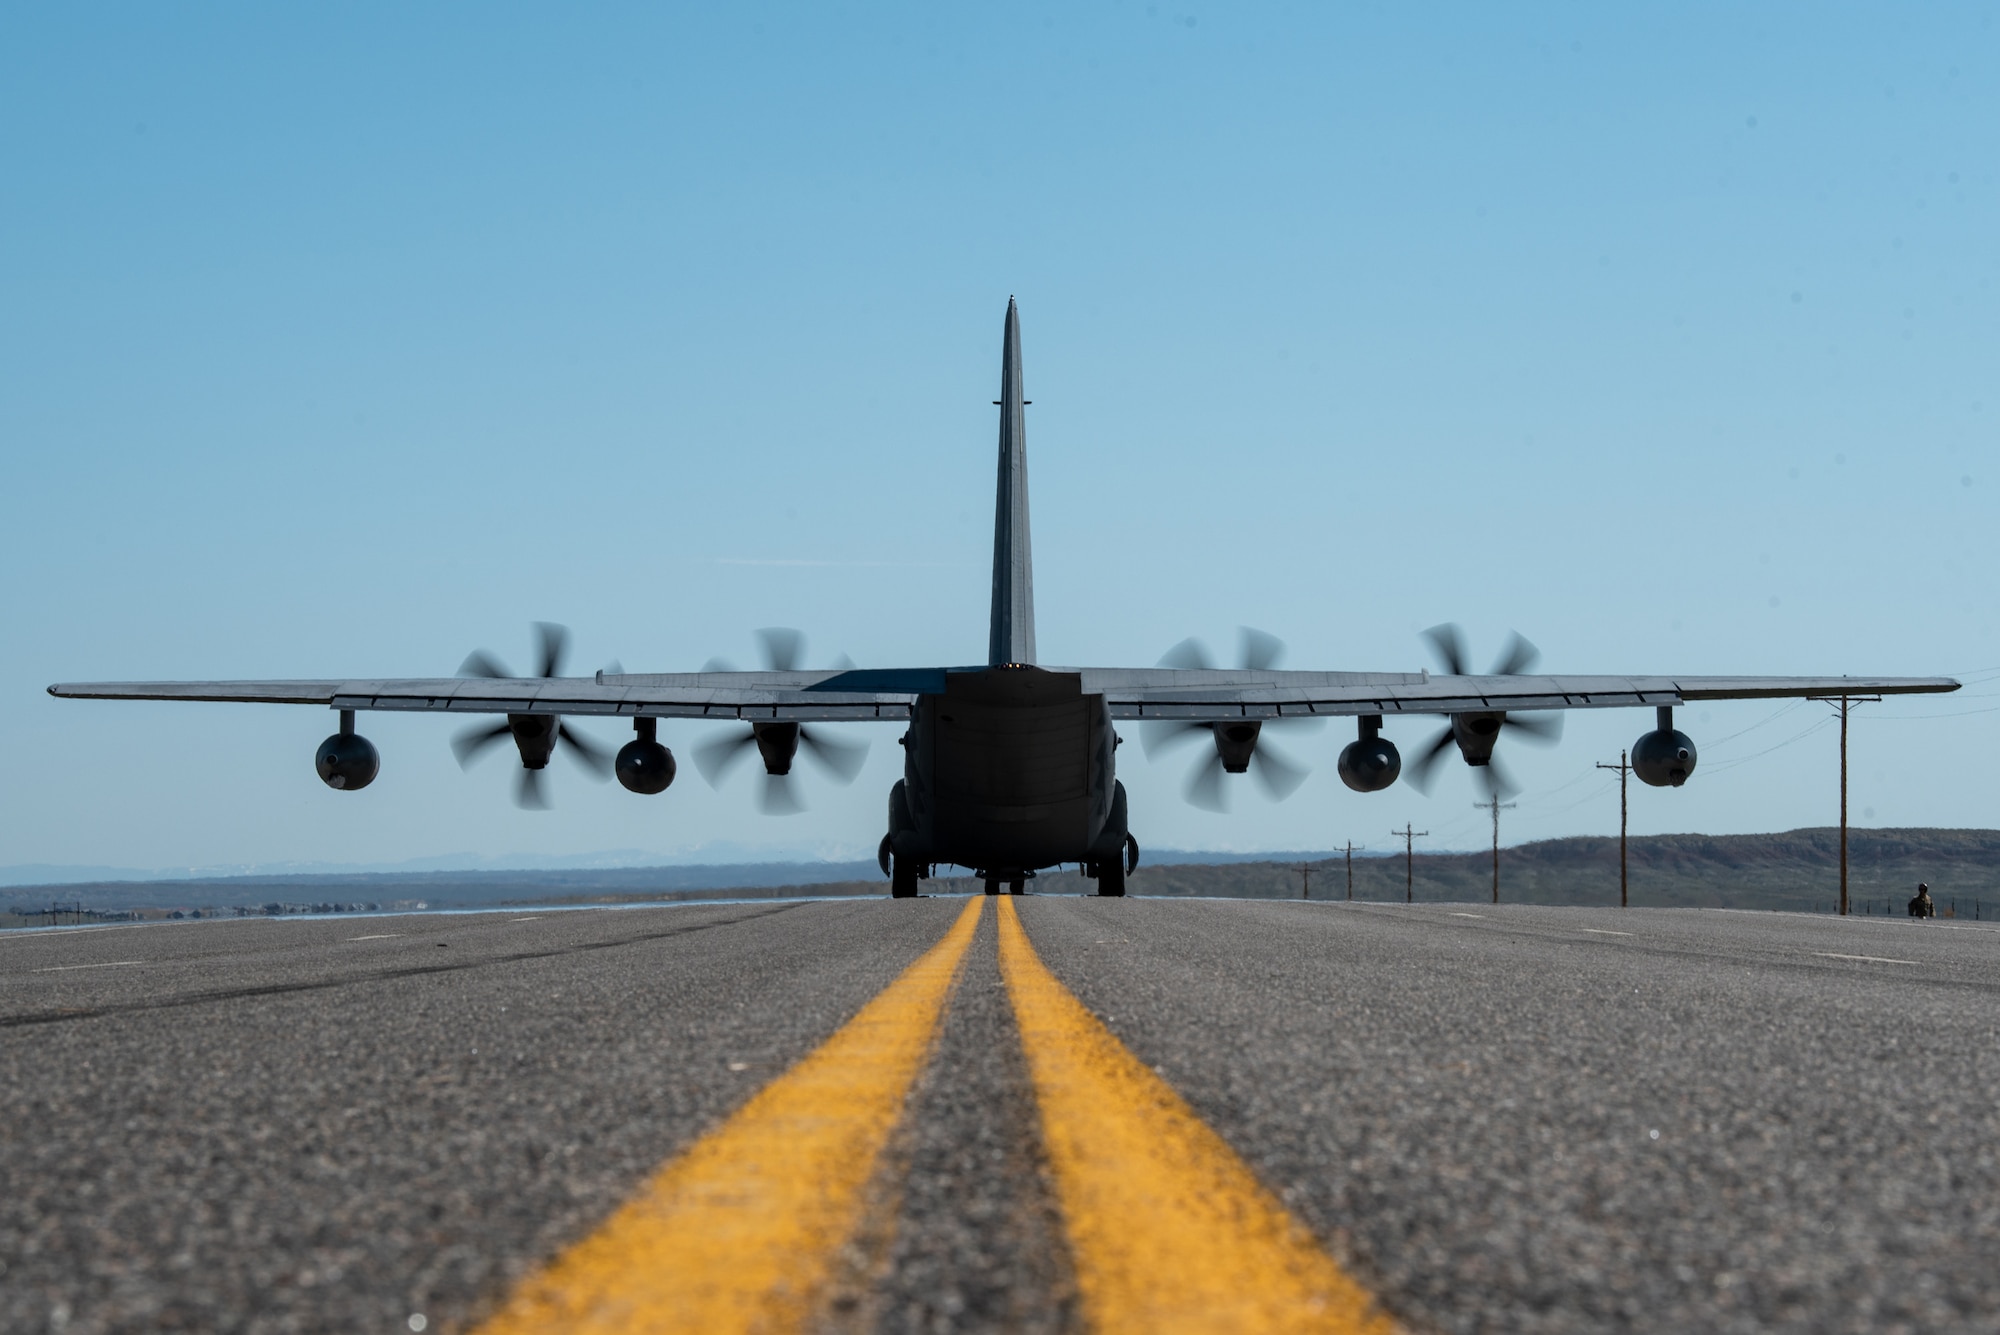 An MC-130J Commando II from the 1st Special Operations Wing prepares to offload a pair of MH-6M Little Birds on Highway 789 during Exercise Agile Chariot near Riverton, Wyoming, May 2, 2023. Agile Chariot tested Agile Combat Employment capabilities, including using smaller, more dispersed locations and teams to rapidly move and support aircraft, pilots and other personnel wherever they’re needed. (U.S. Air National Guard photo by Master Sgt. Phil Speck)